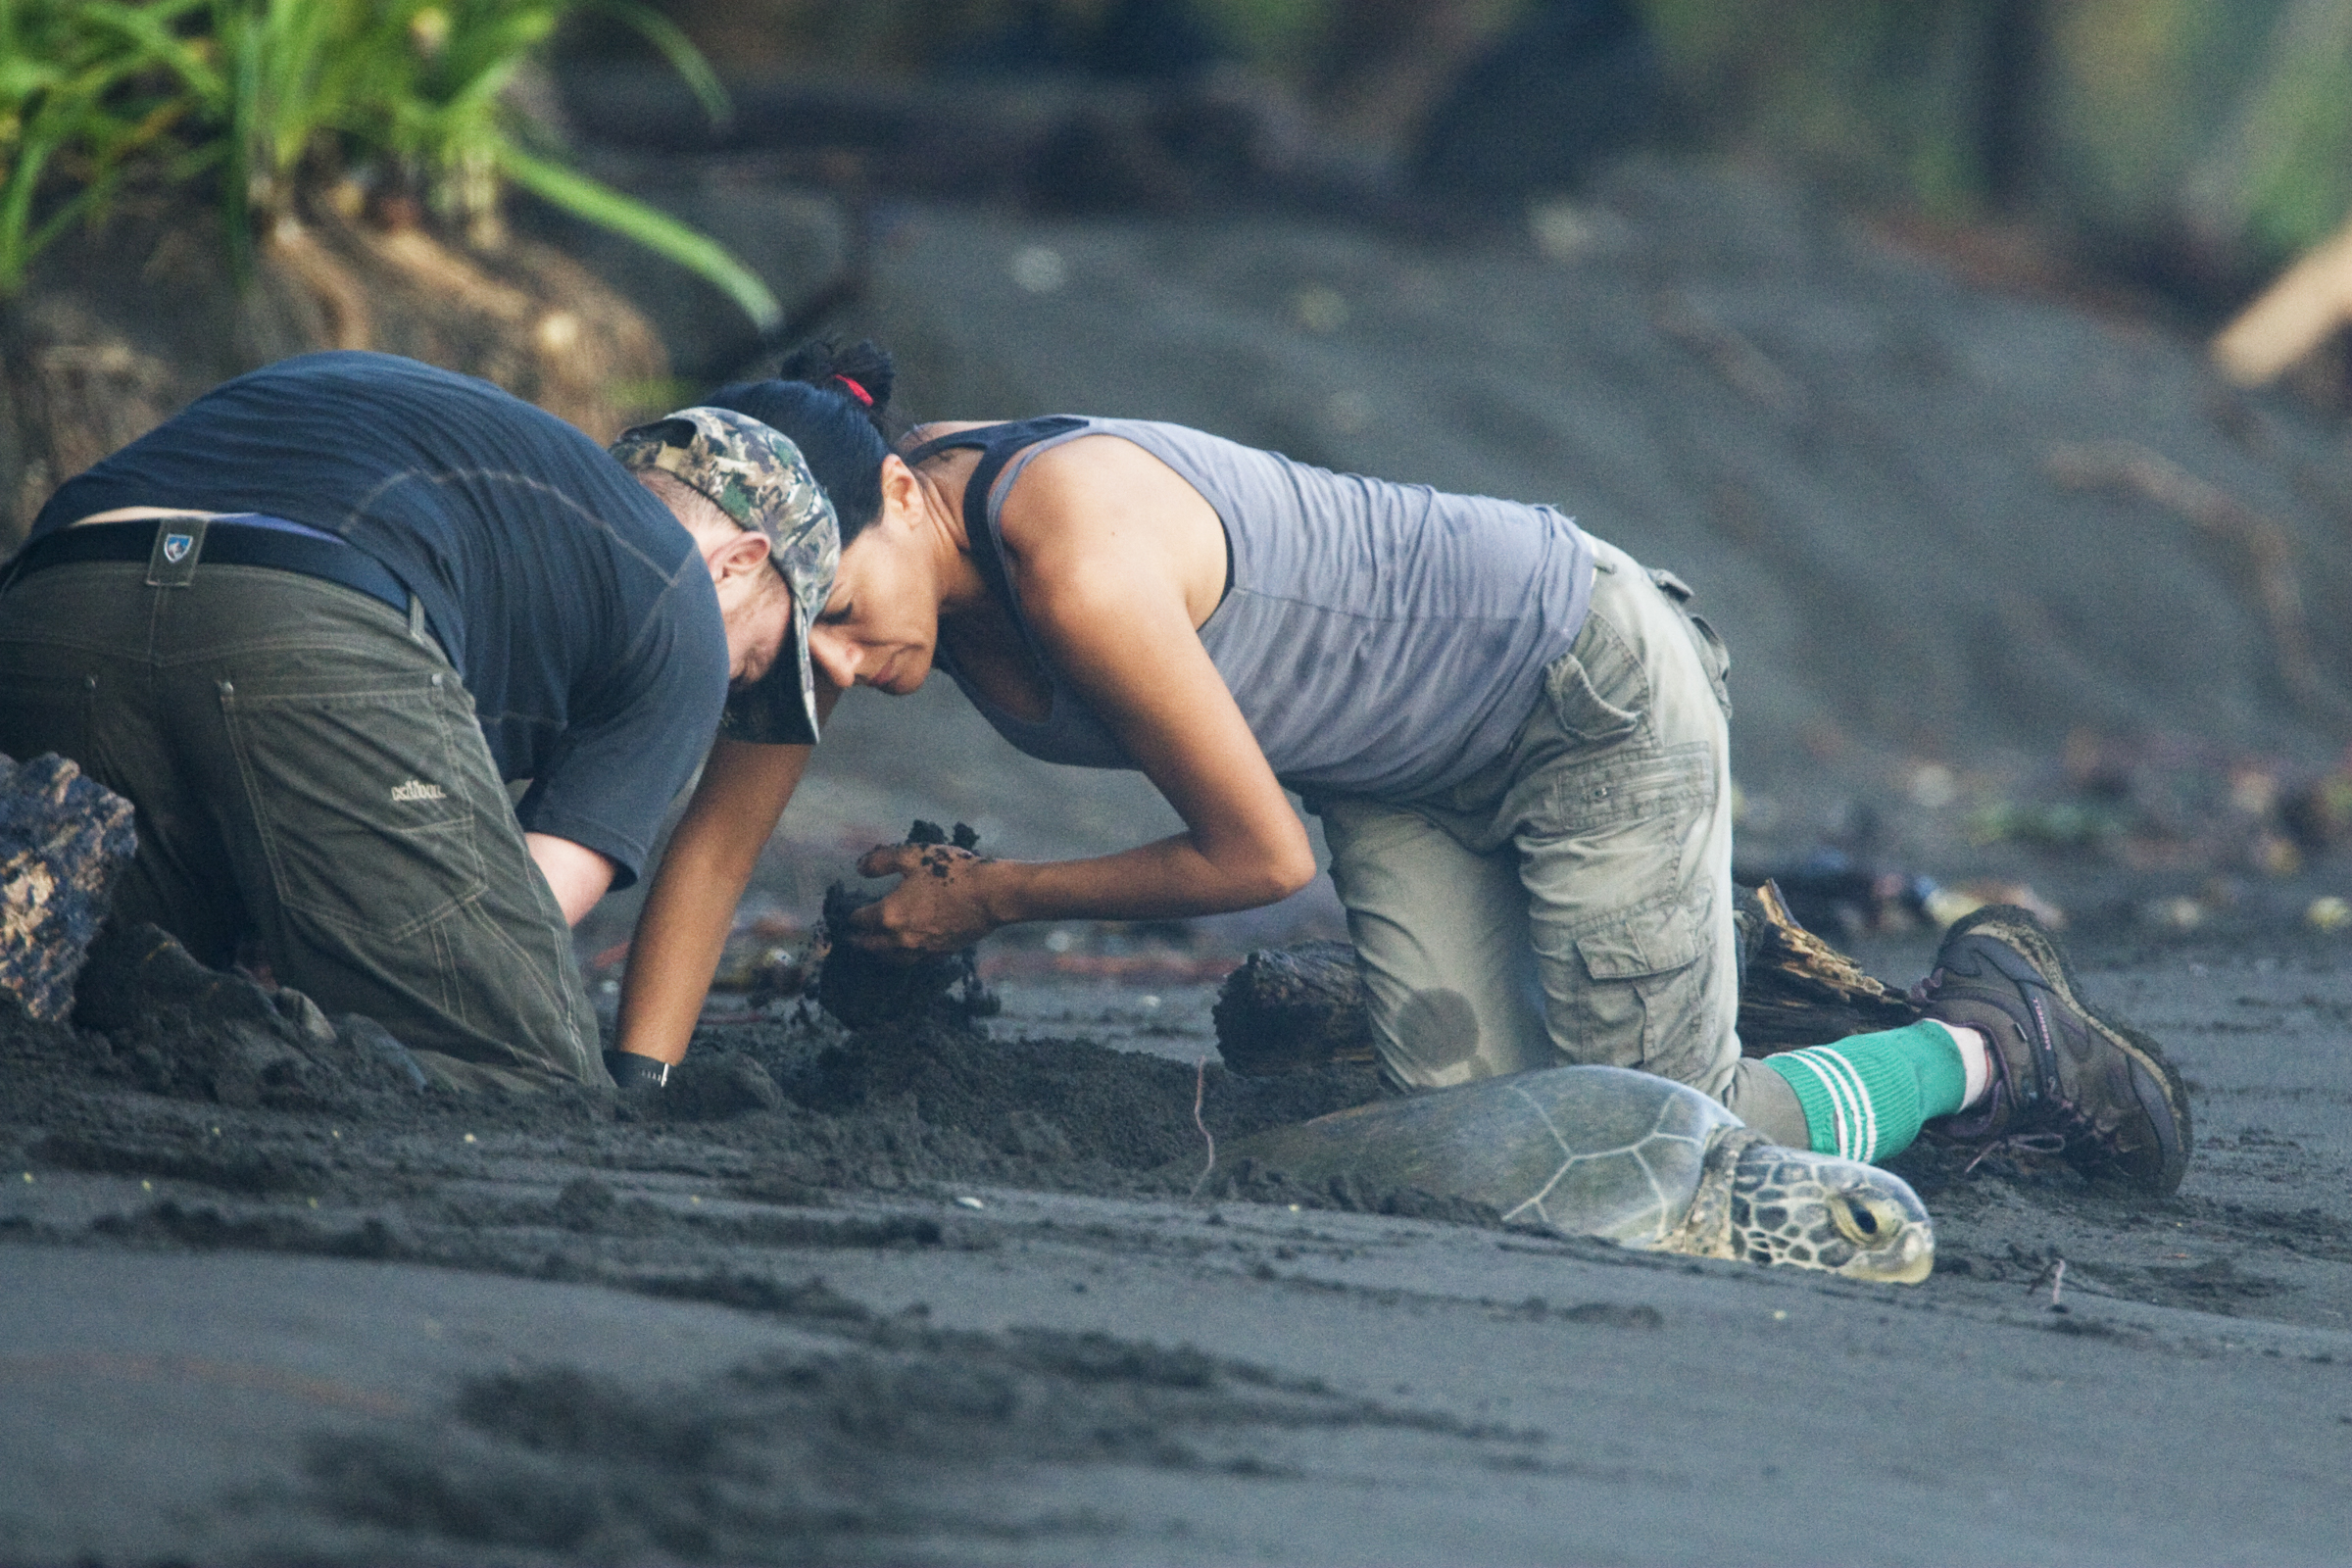 Jaguar (Panthera onca) biologists, Stephanny Arroyo-Arce and Ian Thomson, digging out female Green Sea Turtle (Chelonia mydas) that is stuck in the sand, Coastal Jaguar Conservation Project, Tortuguero National Park, Costa Rica